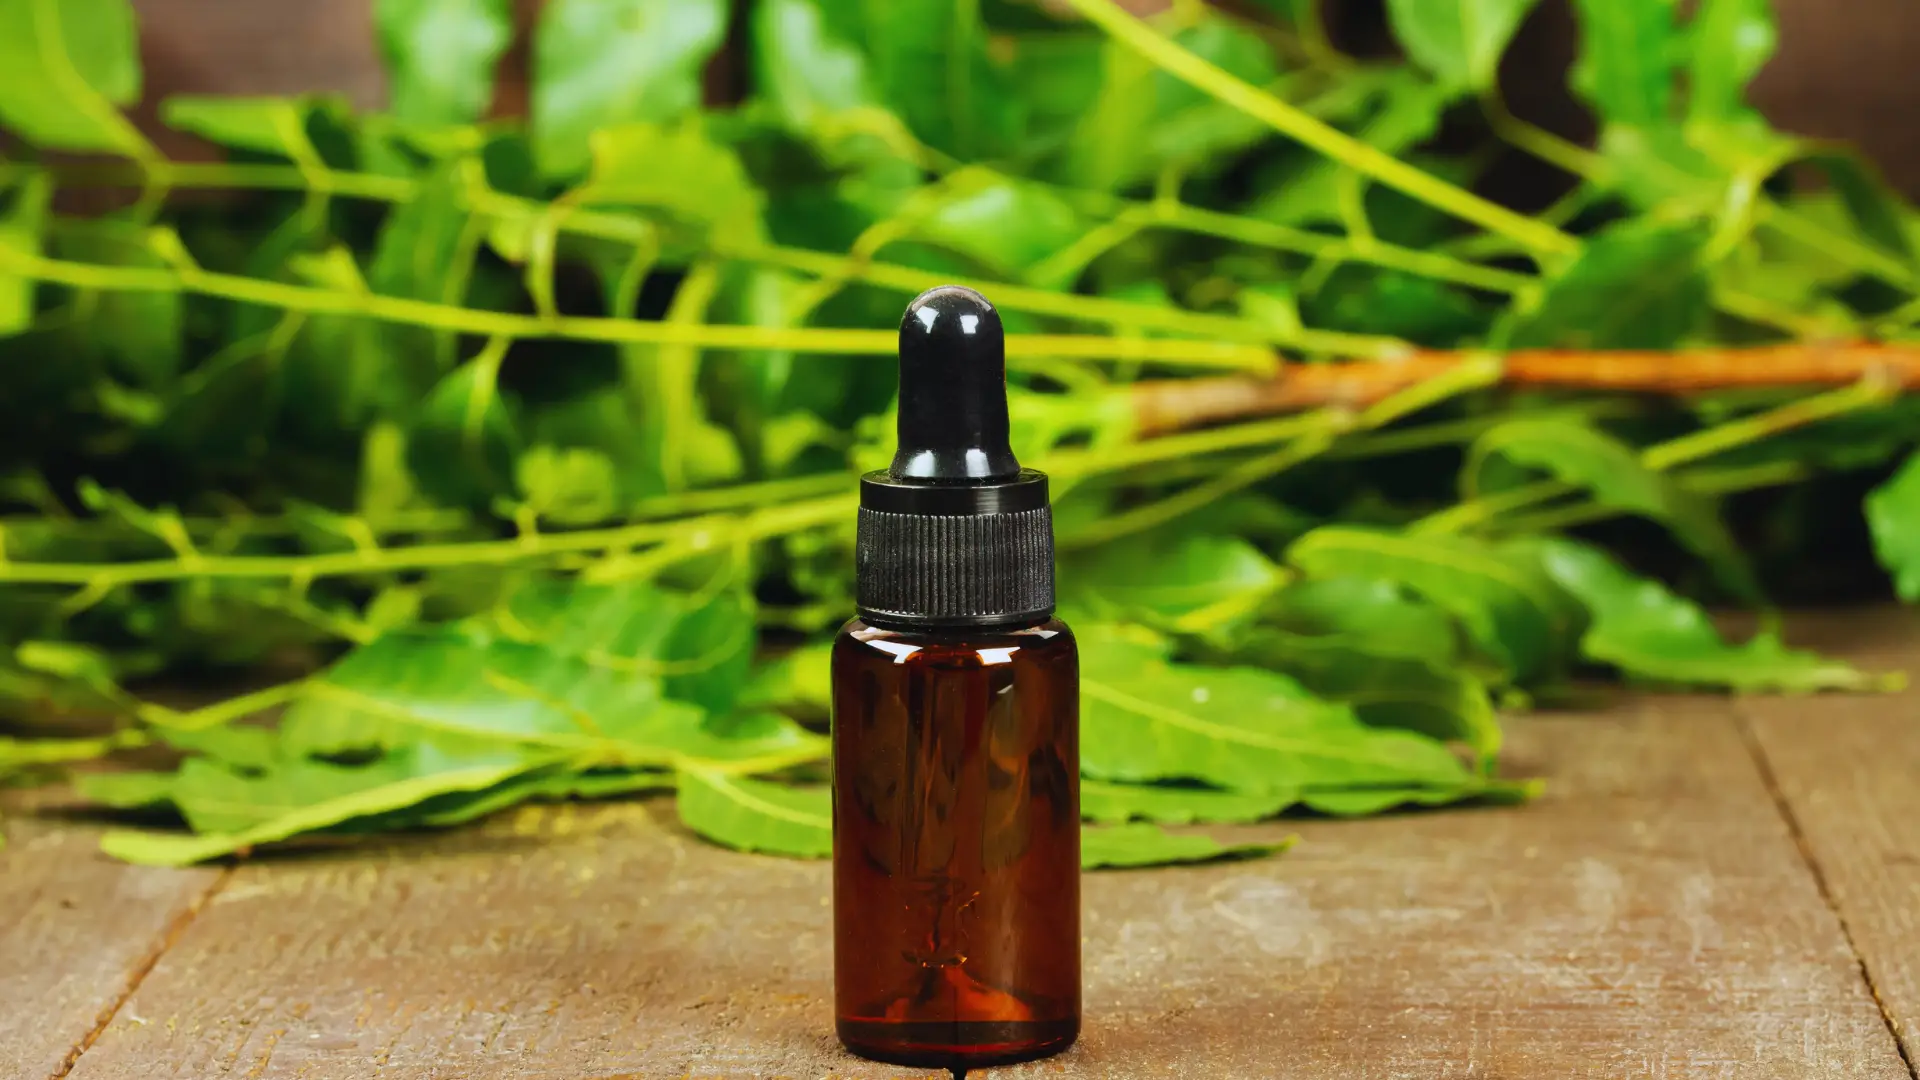 which plants do not like neem oil